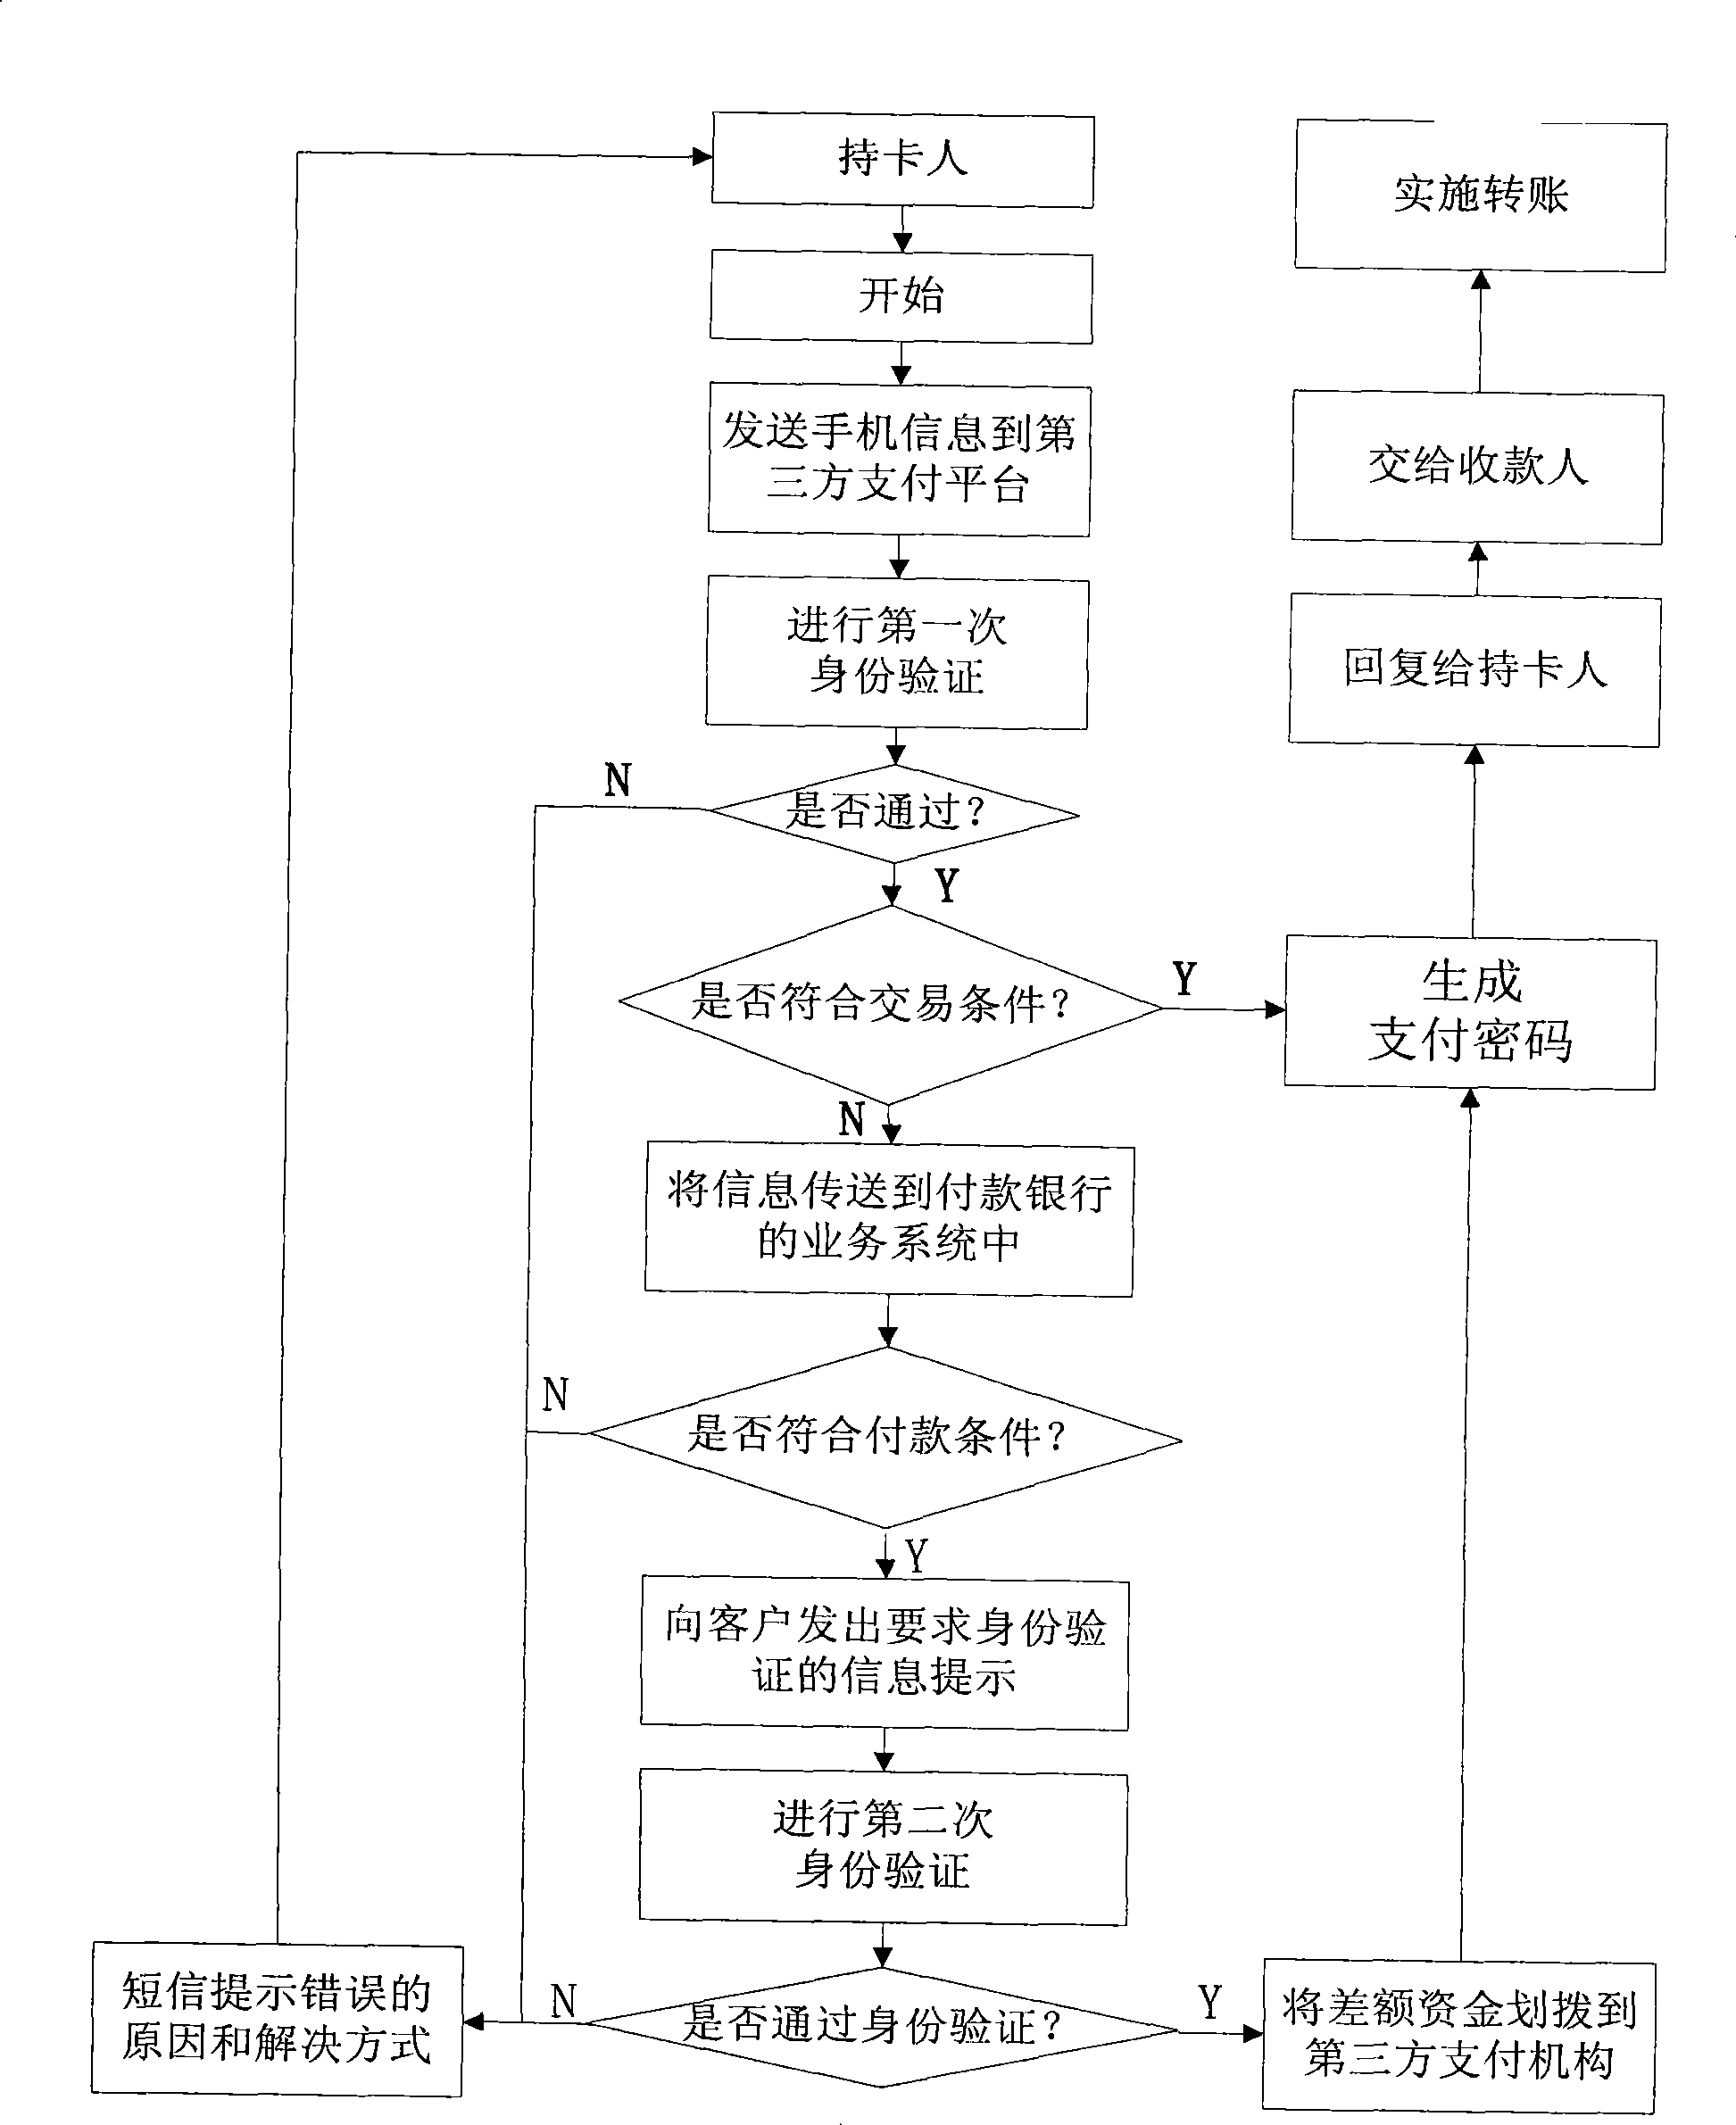 Method for safely replacing bank POS machine